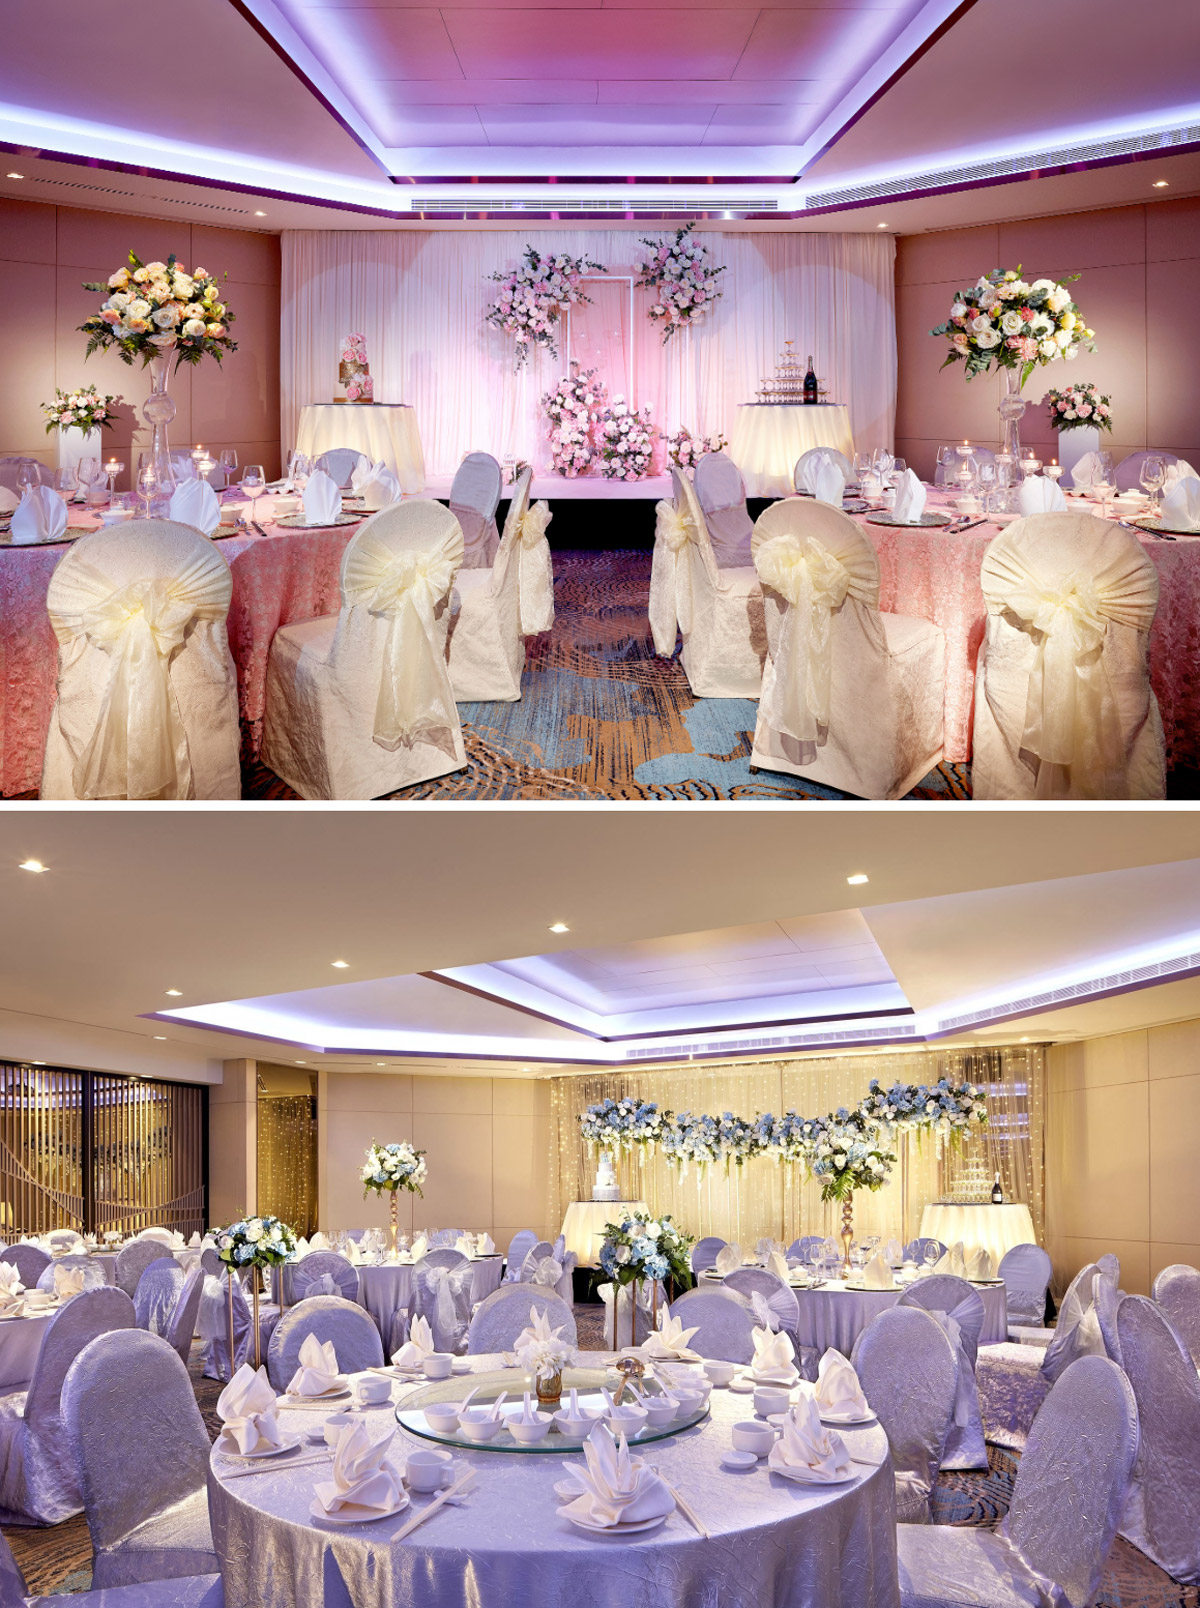 A Dream Wedding With Your Dreamboat Only at Four Points by Sheraton Singapore, Riverview